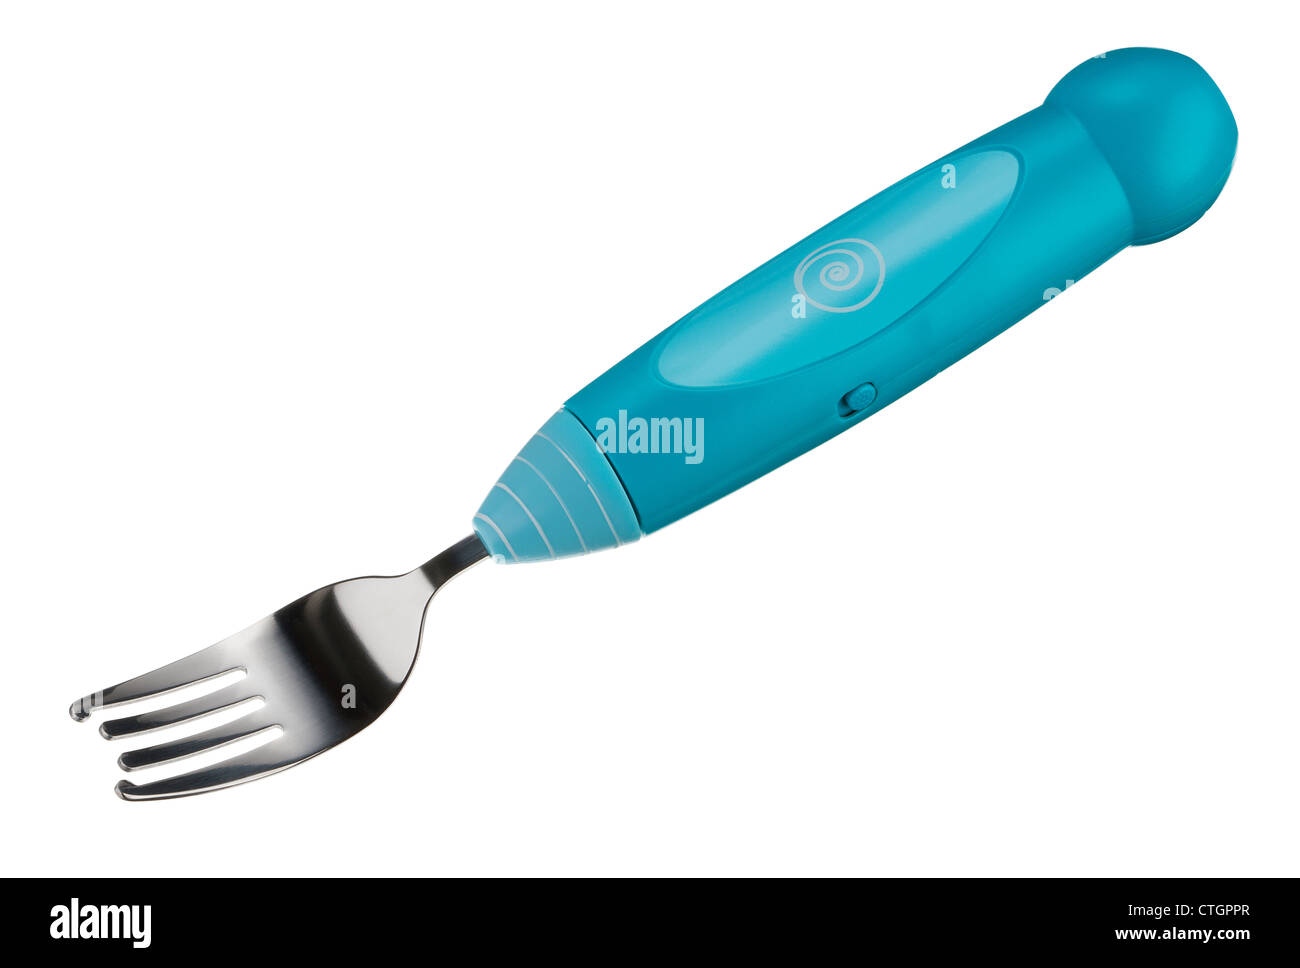 Battery operated spinning pasta fork Stock Photo